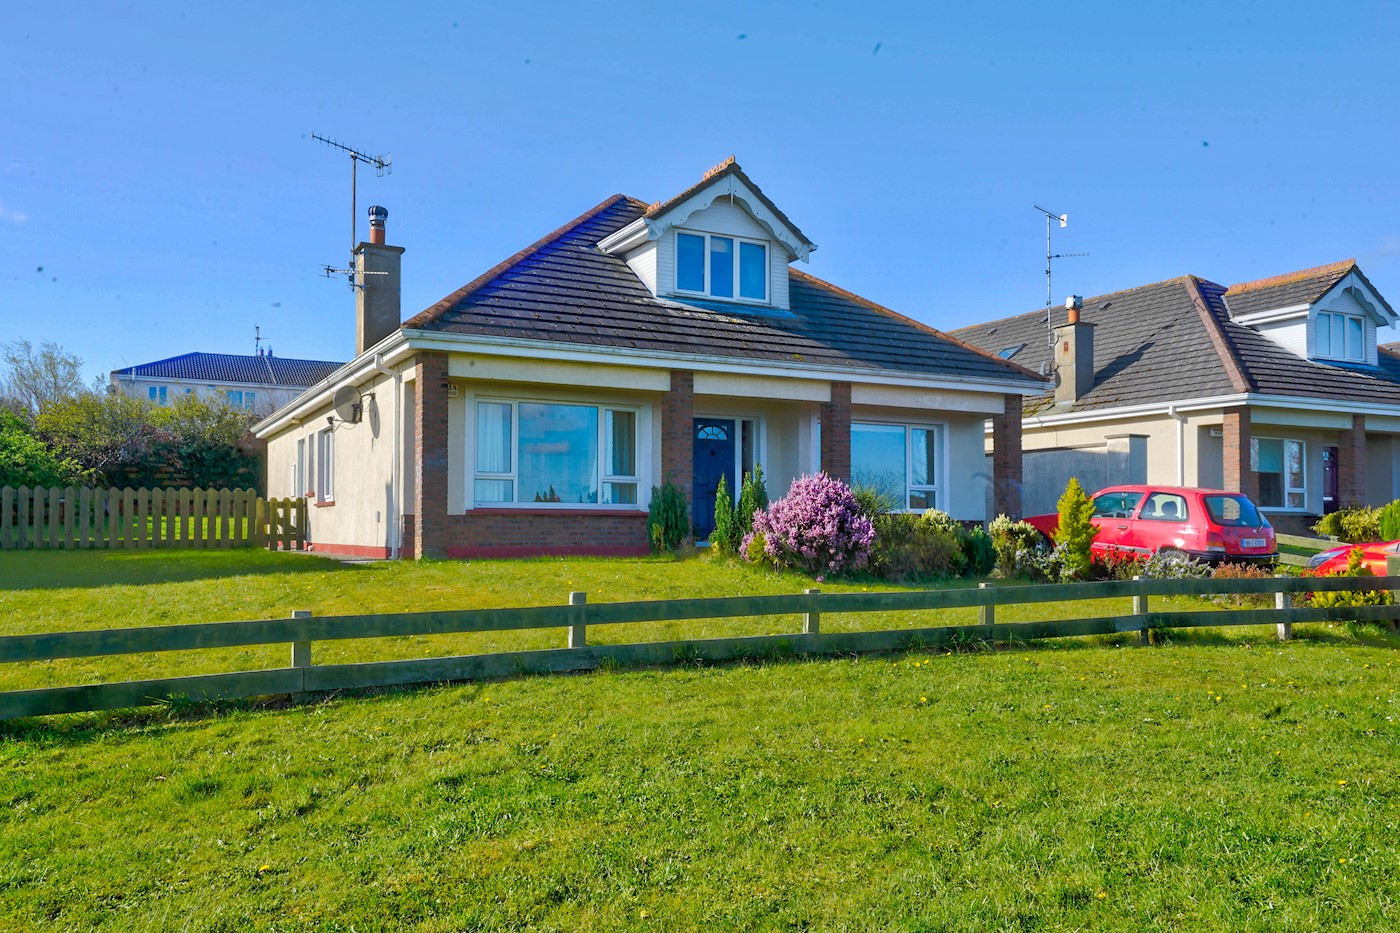 1 Pebble Bay, Friars hill, Wicklow Town, Co. Wicklow, A67XD25 1/22